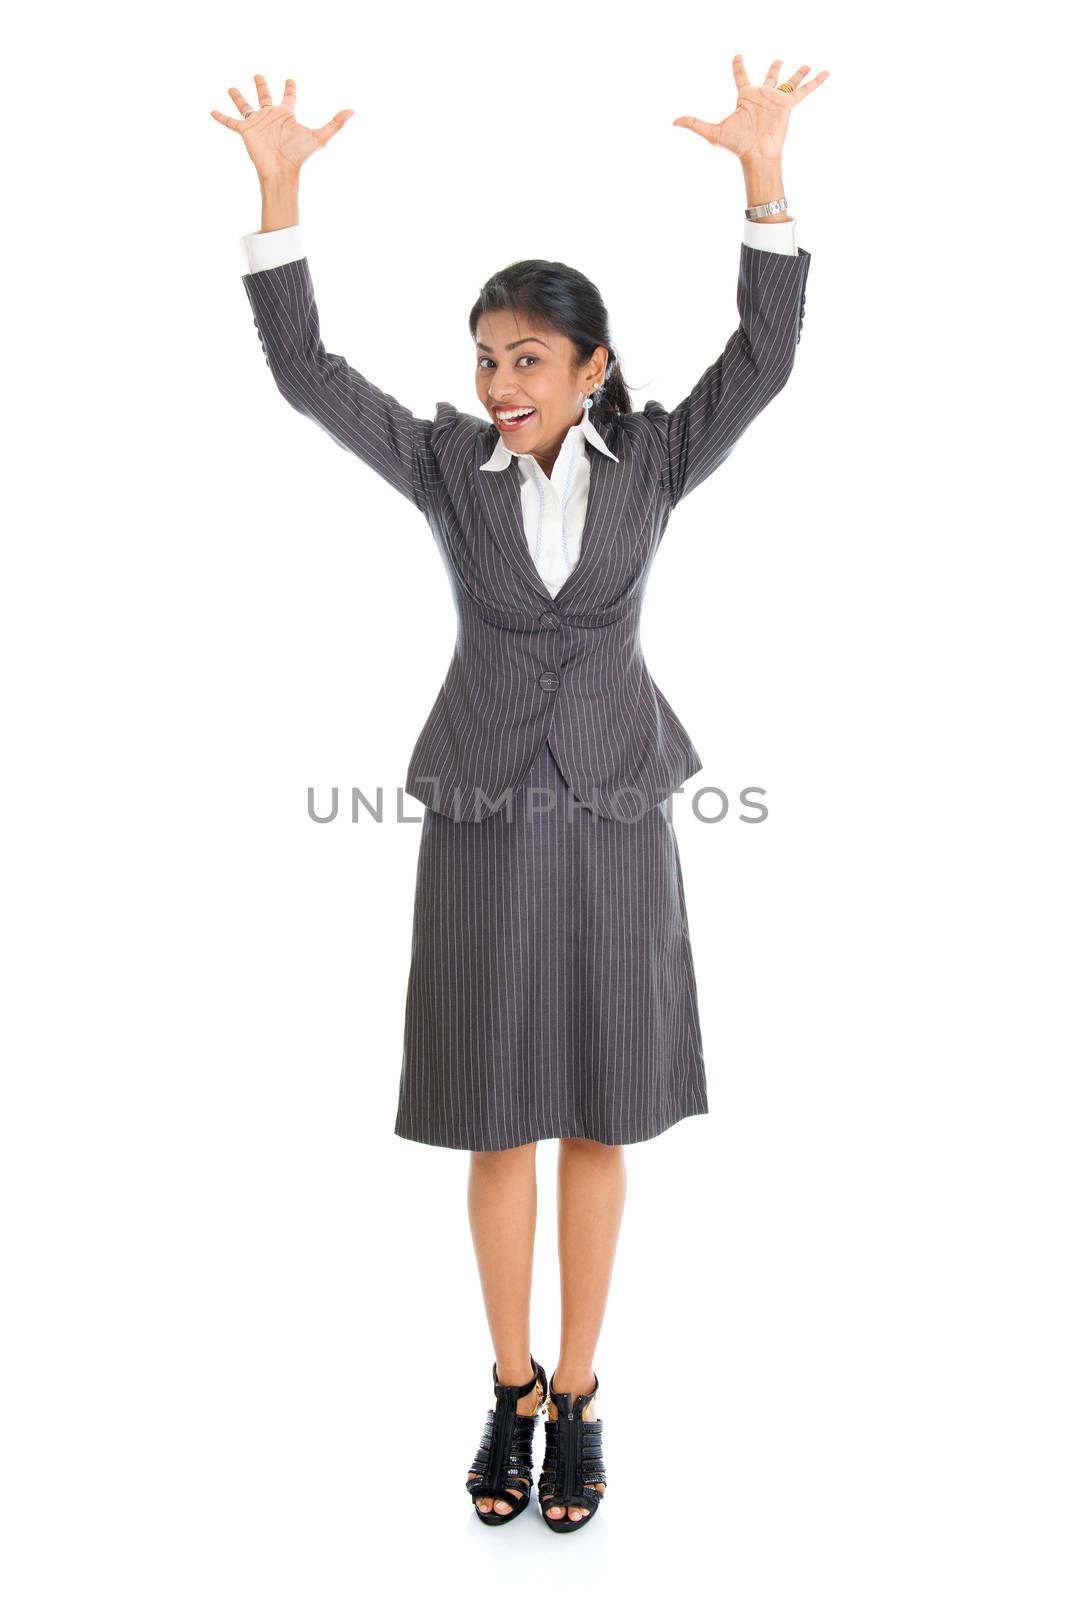 Full length portrait of excited Indian business woman arms raised, standing isolated on white background. 